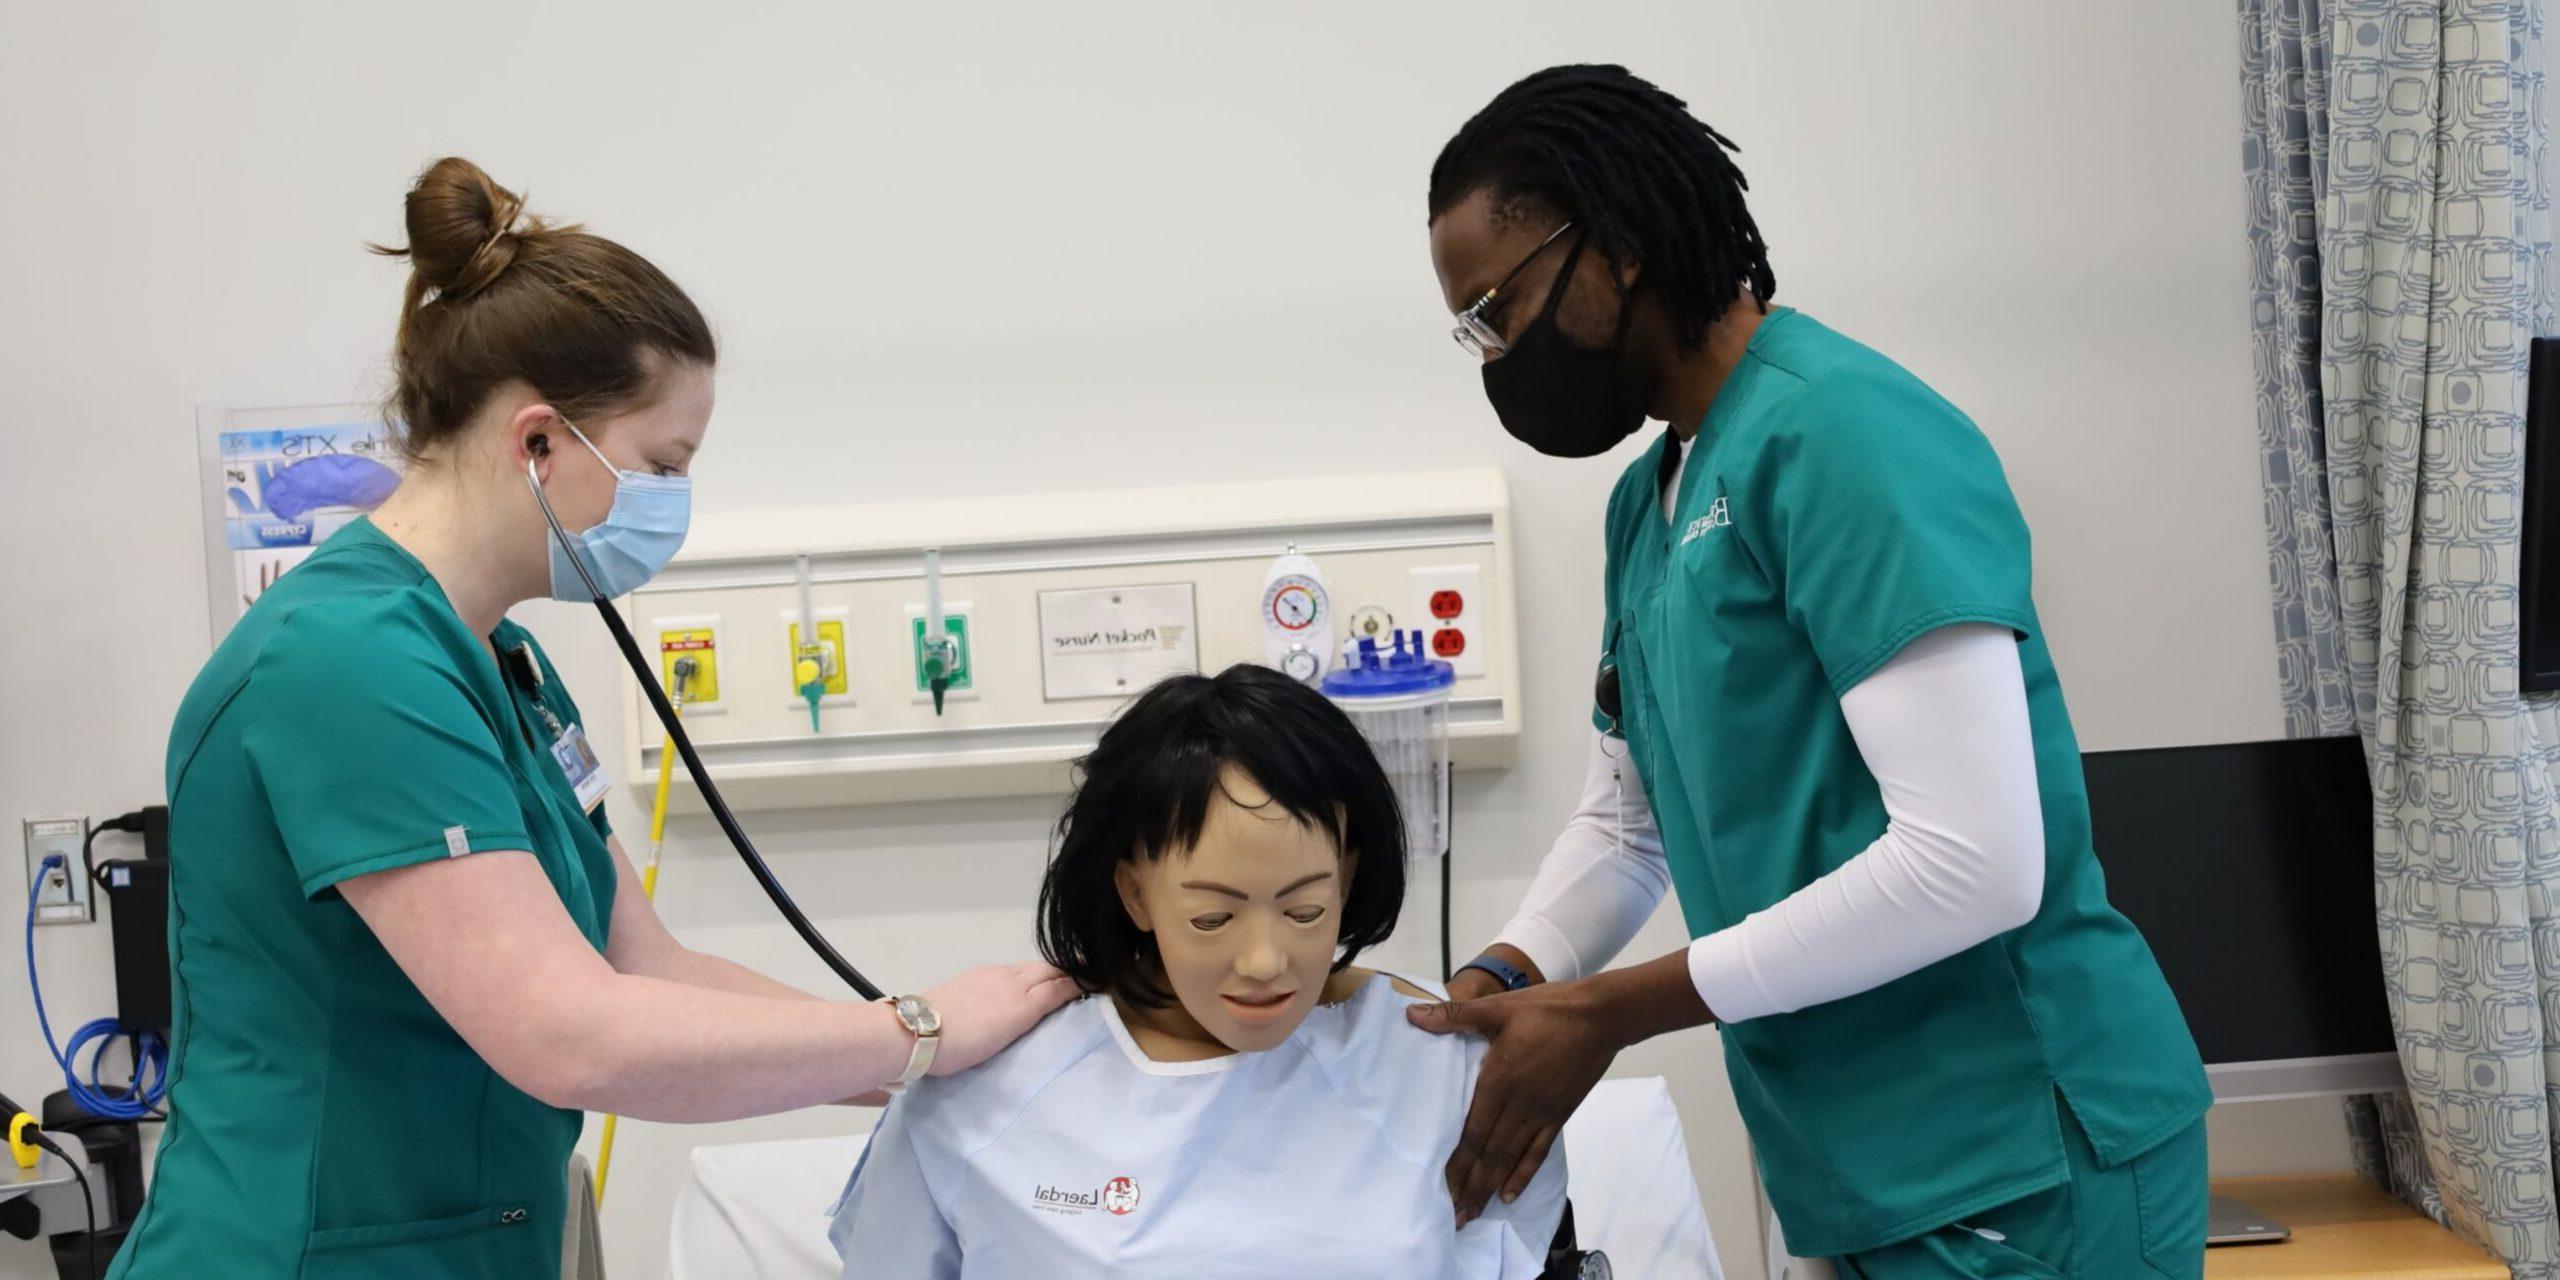 TWO NURSING STUDENTS WITH SIM DOLL